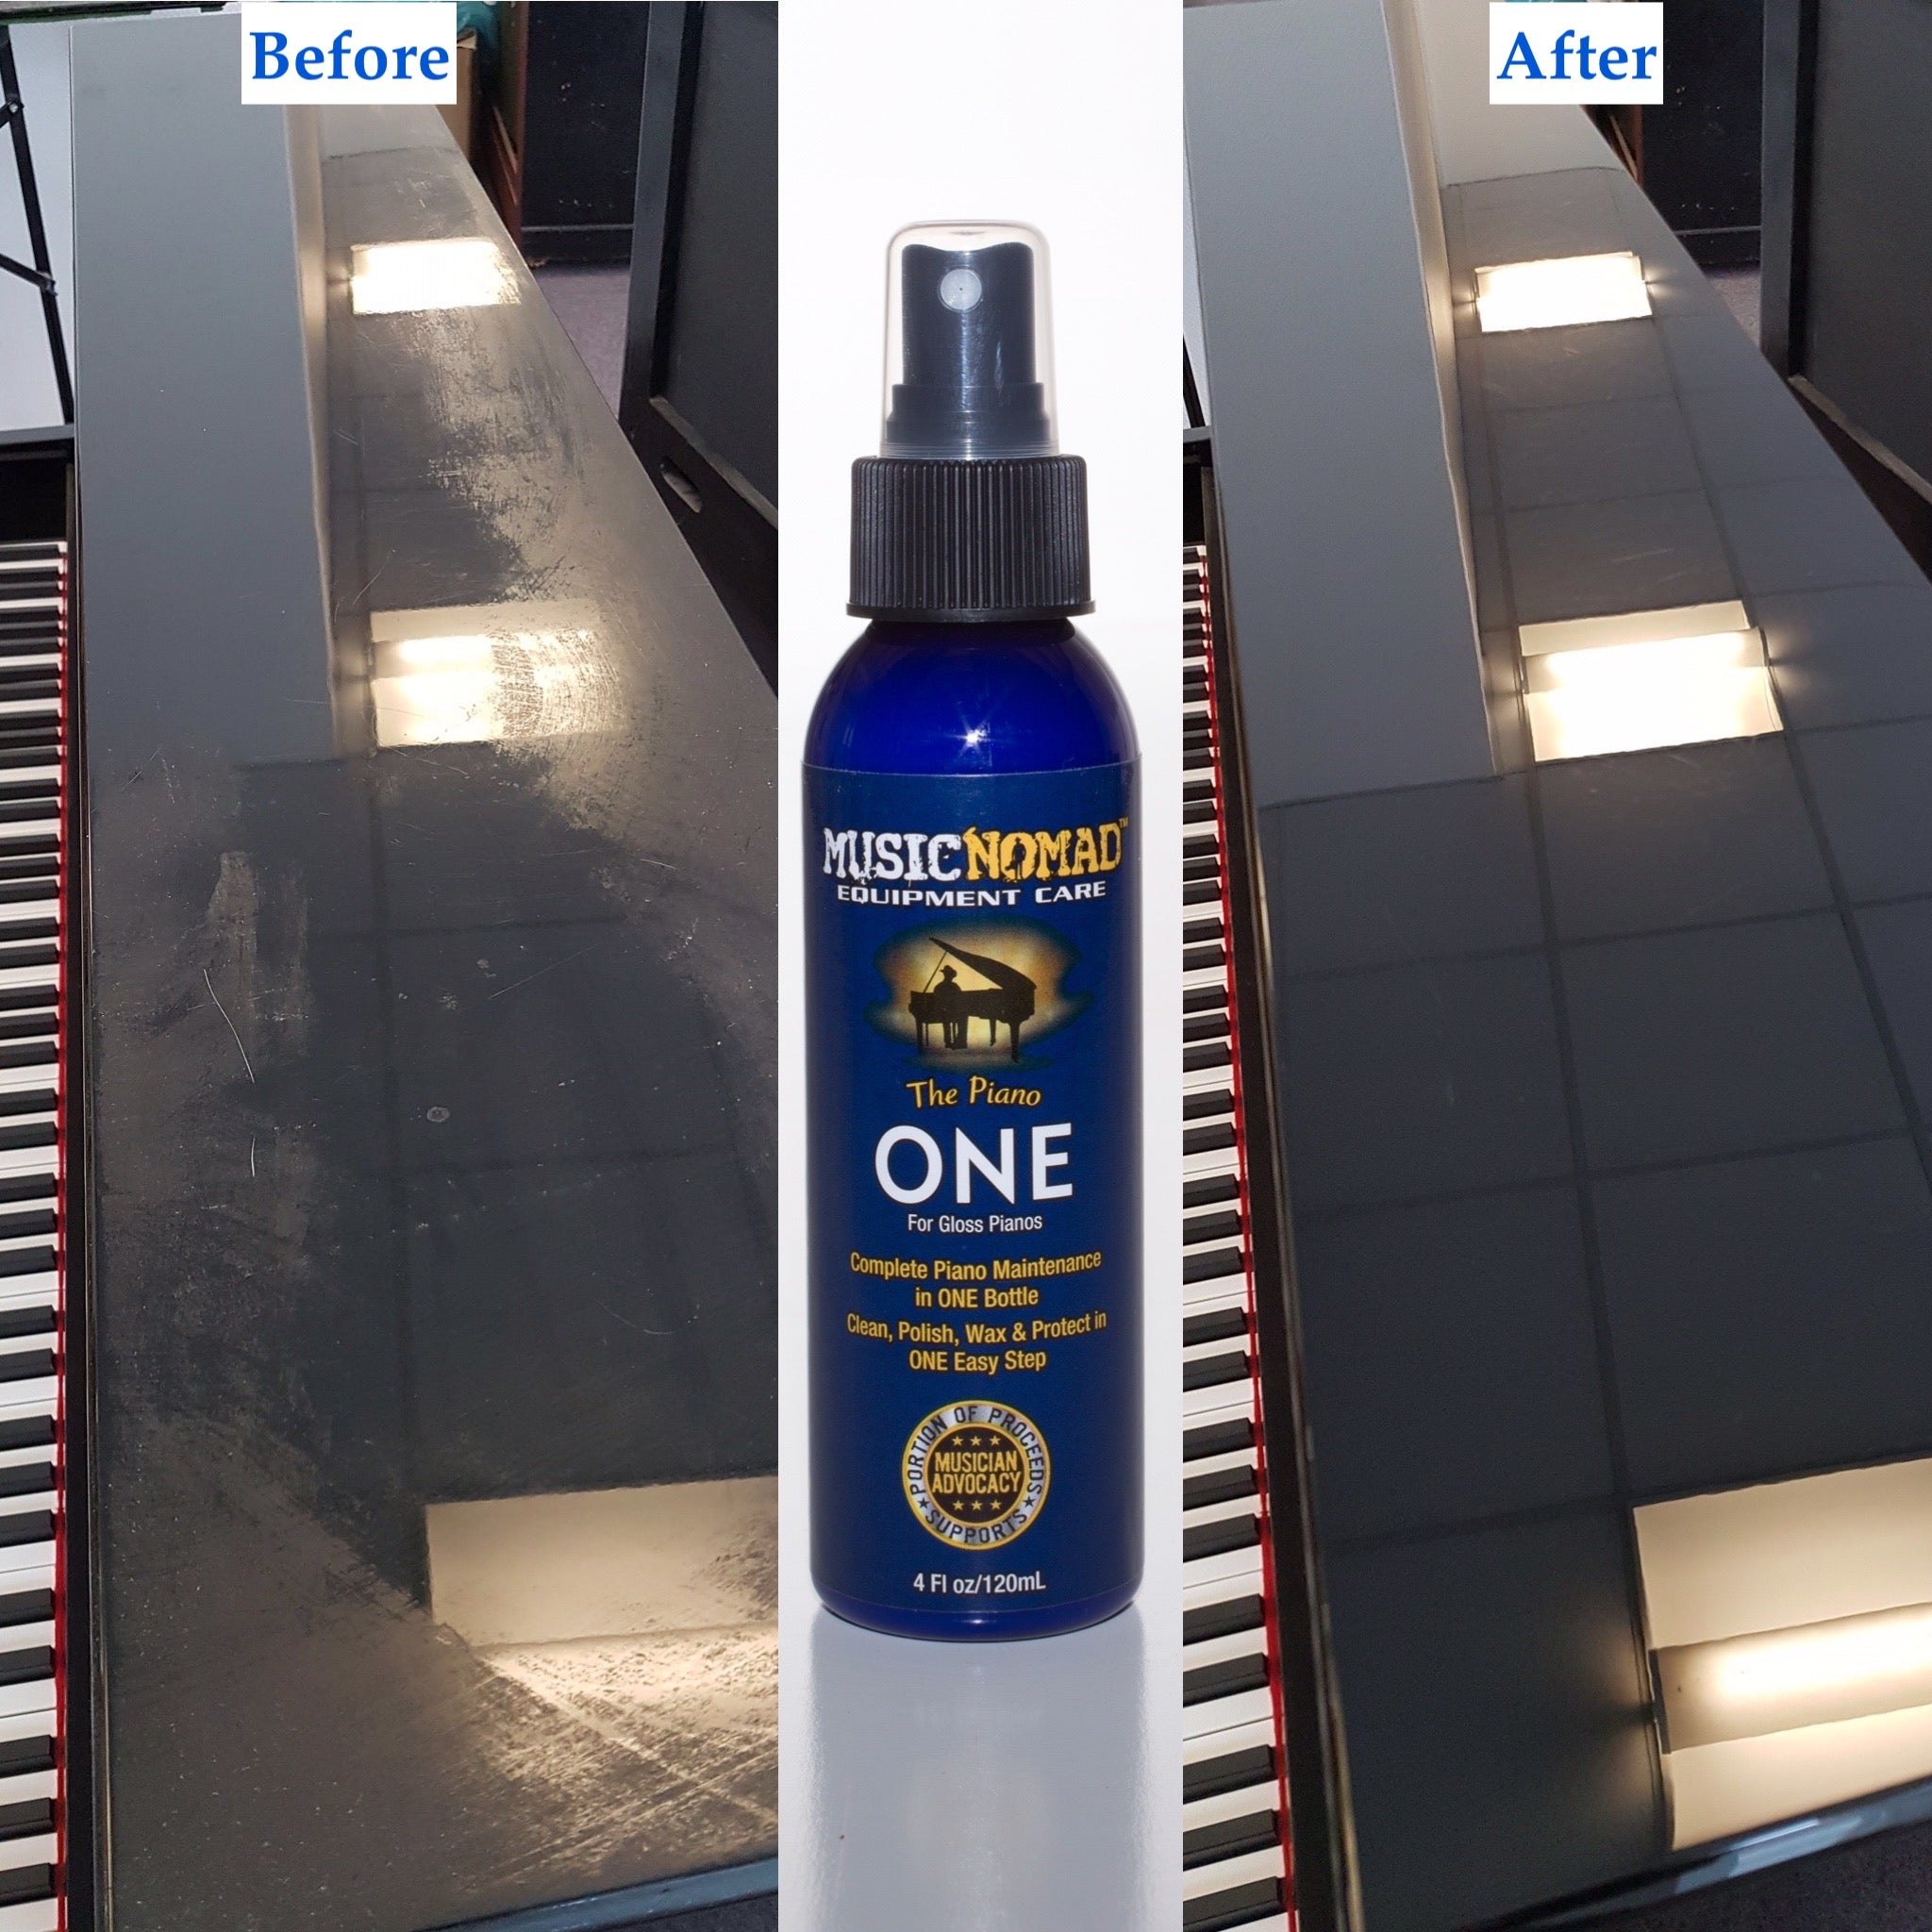 MusicNomad The Piano ONE Cleaner, Polish & Wax for Gloss Pianos - 4 oz. MN130 - HIENDGUITAR   musicnomad musicnomad